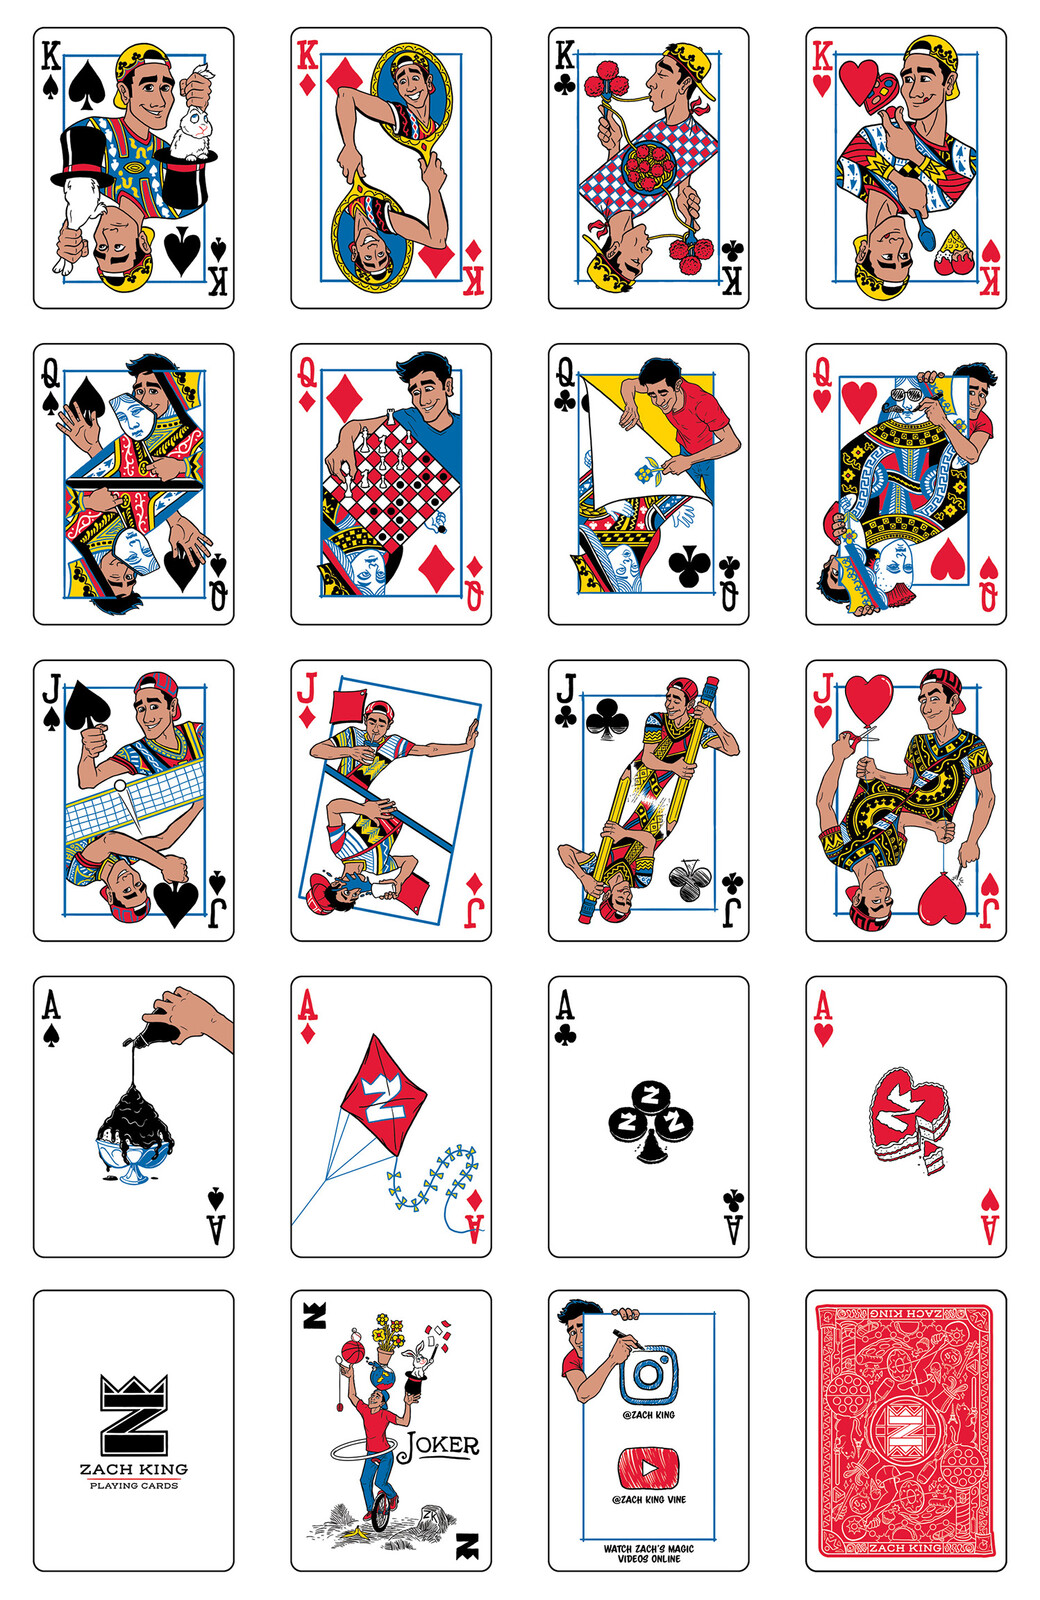 All of the card designs that are not number cards